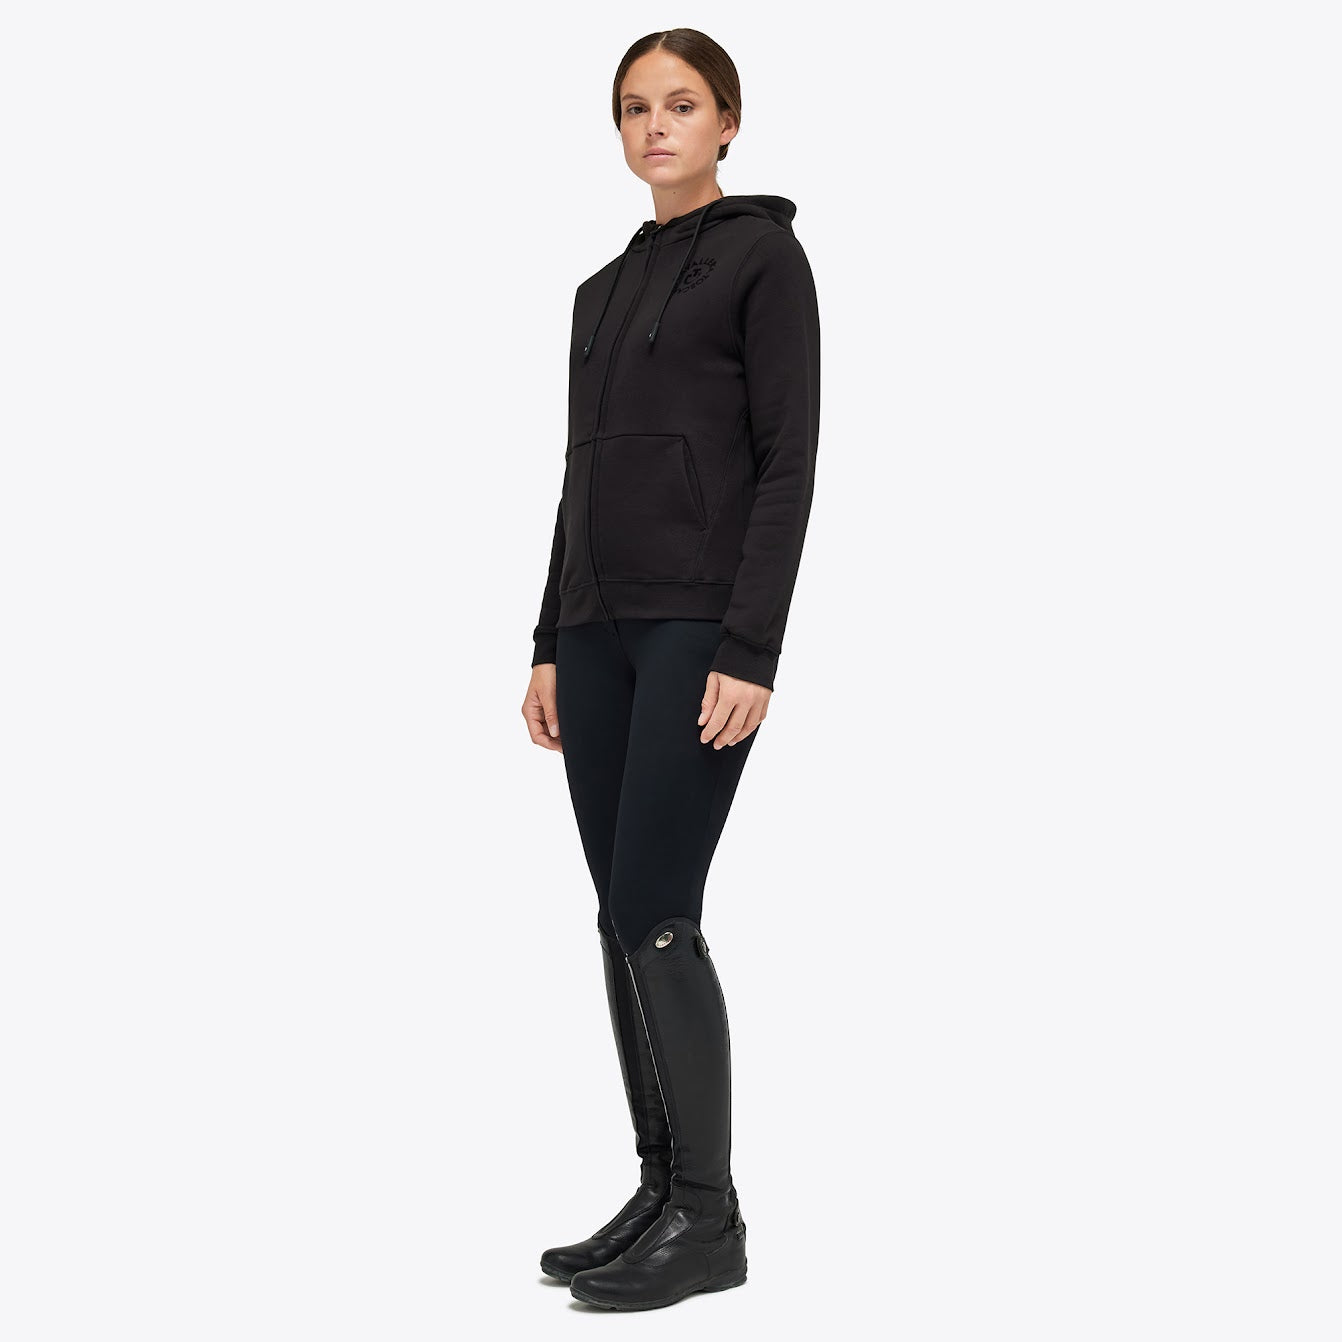 The Cavalleria Toscana Orbit black zip through hoody has the new ct orbit logo on the front. Perfect for the yard or shows. The CT hoody is made from super soft stretch jersey with a fleece lining.  Machine washable 